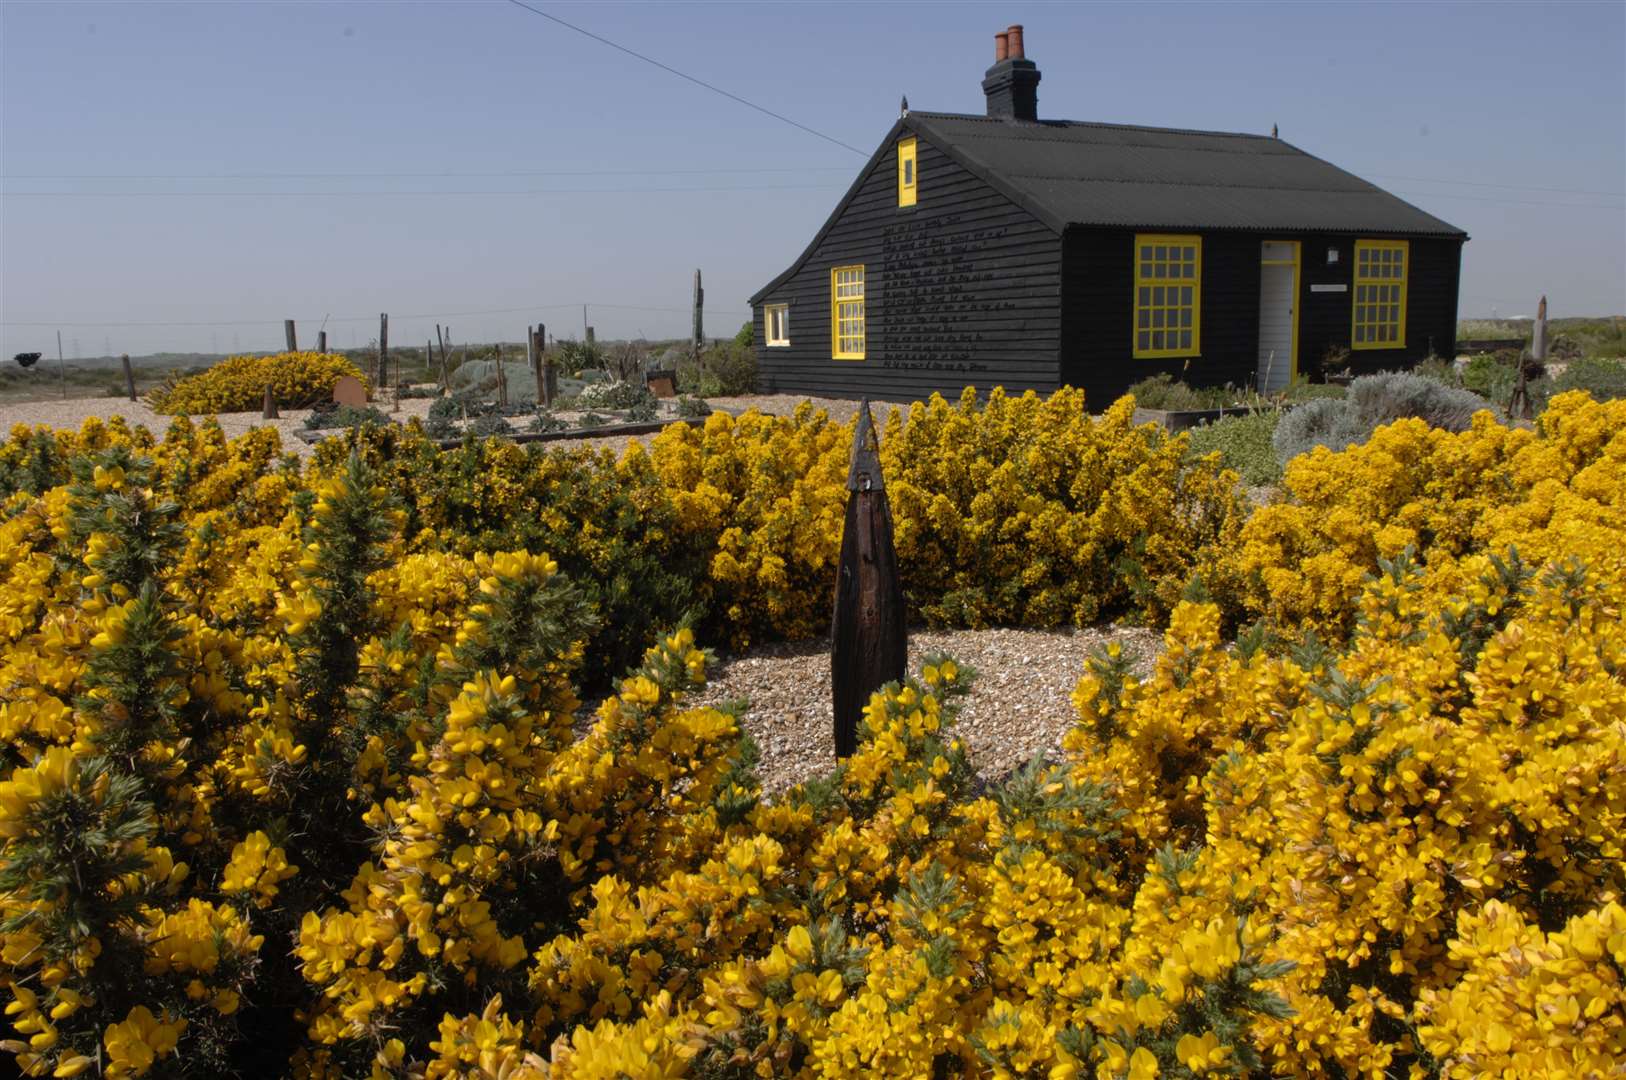 Fundraisers managed to save Derek Jarman's former home at Dungeness